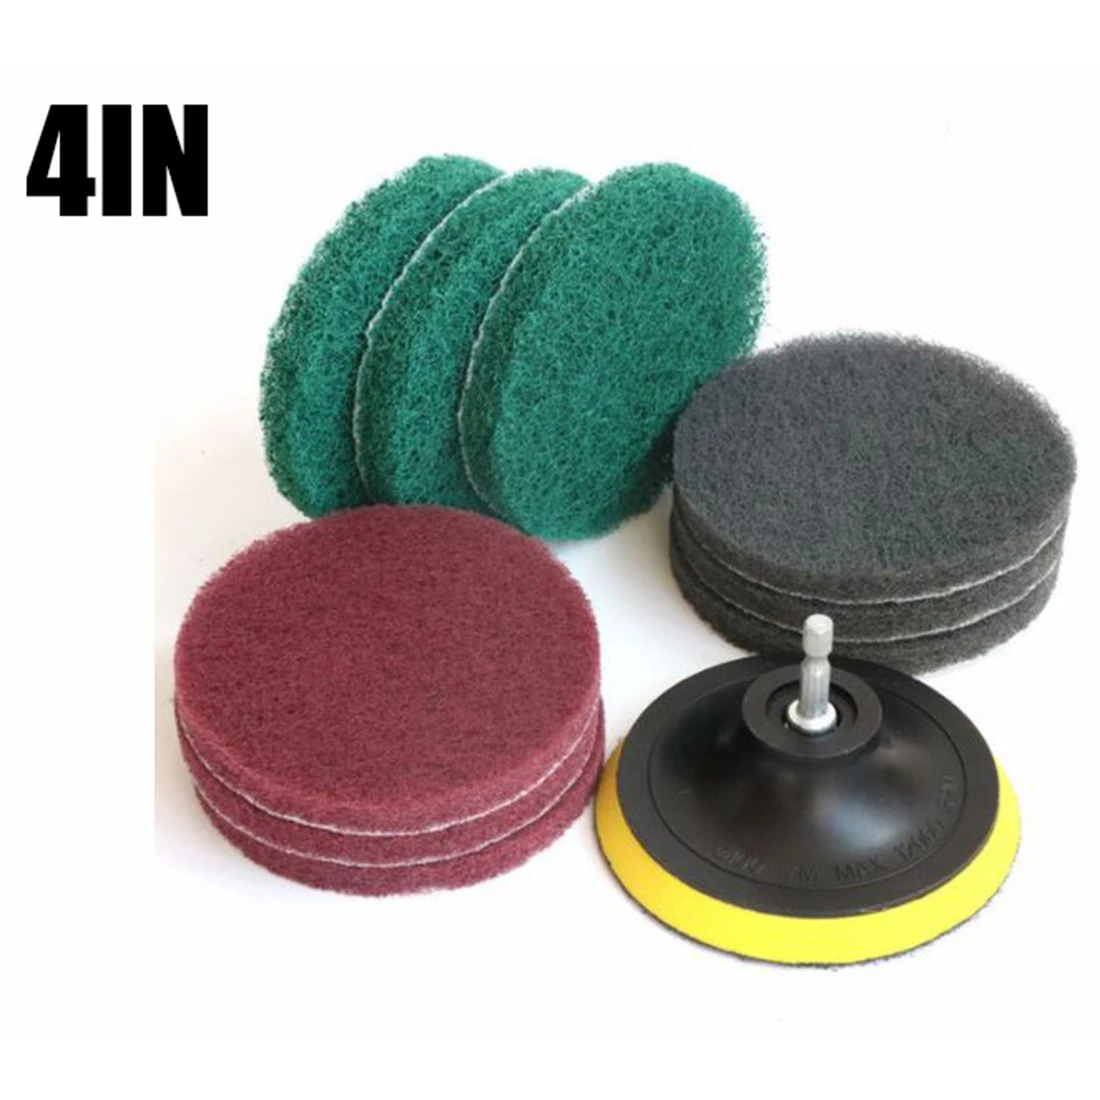 4/5inch Drill Power Brush Tile Scrubber Scouring Pads Cleaning Kit Household Cleaning Tool For Bathroom Floor Tub Polishing Pad